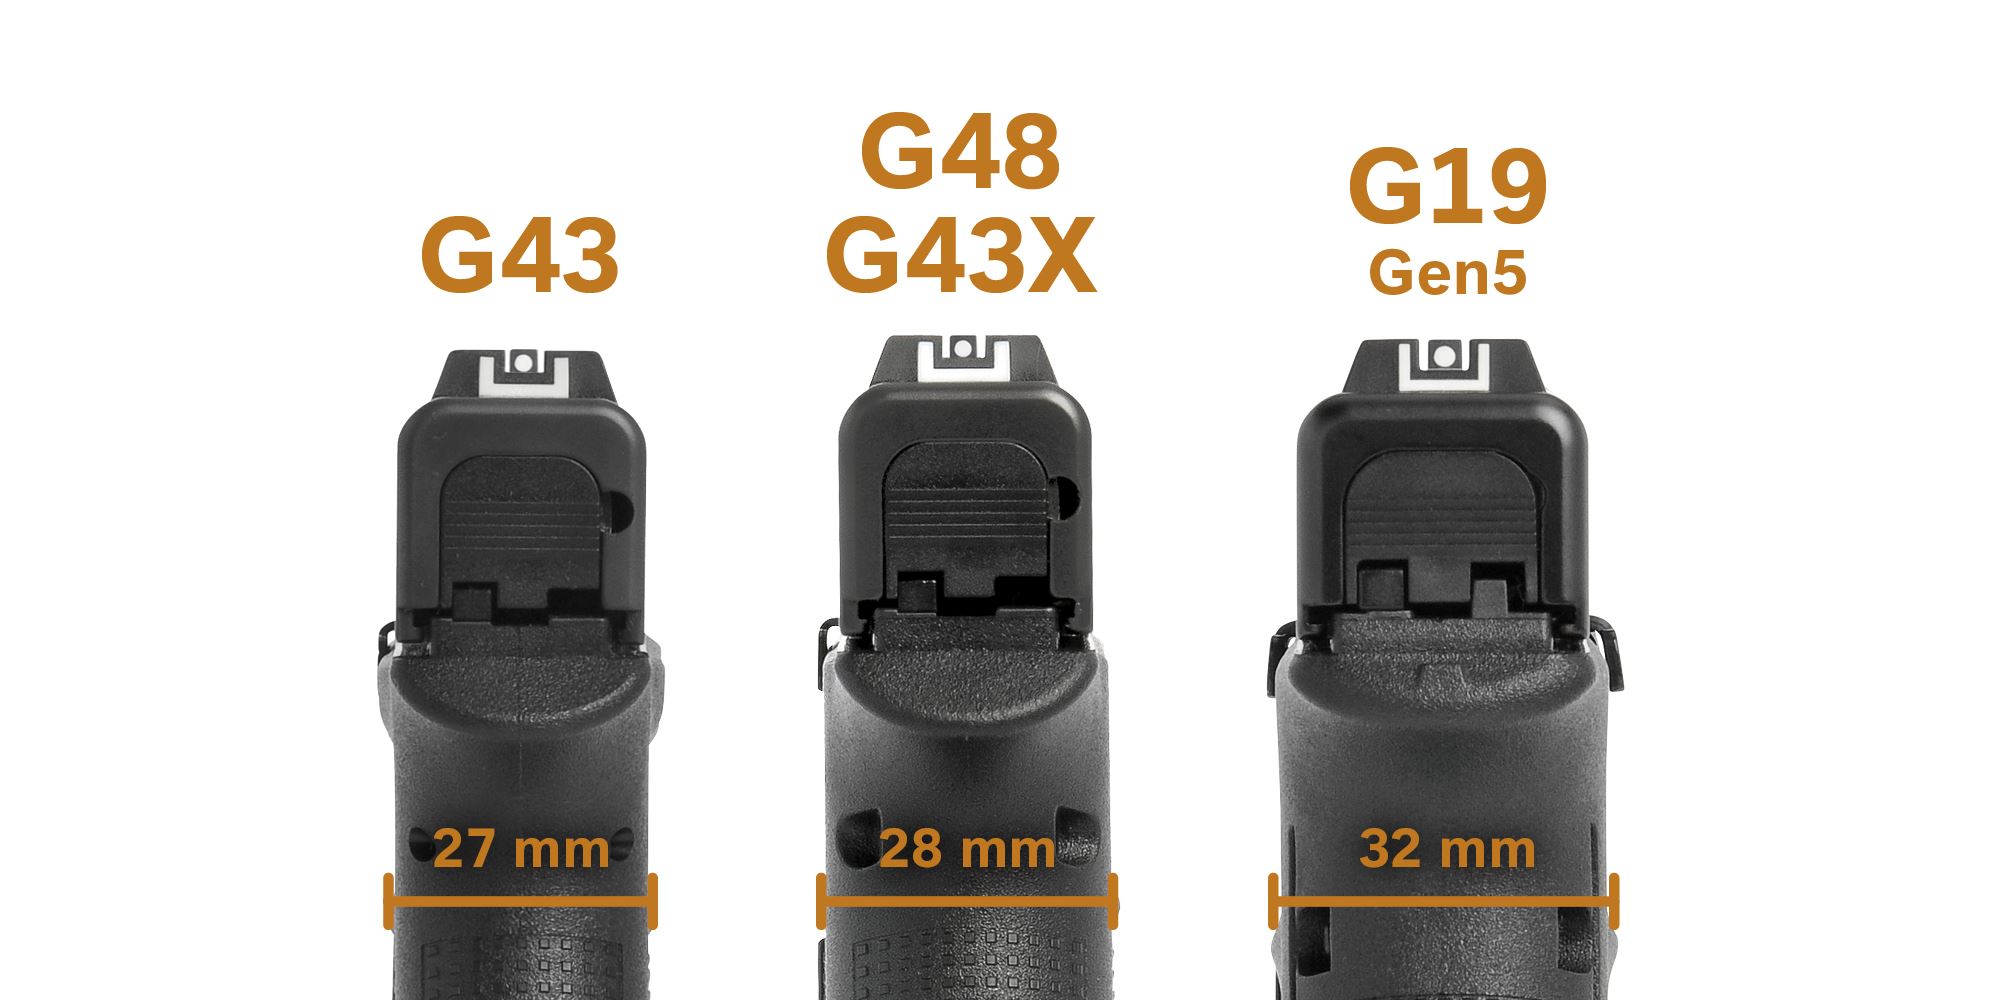 The GLOCK models G43X Rail and G48 Rail feature the same compact slim frame...